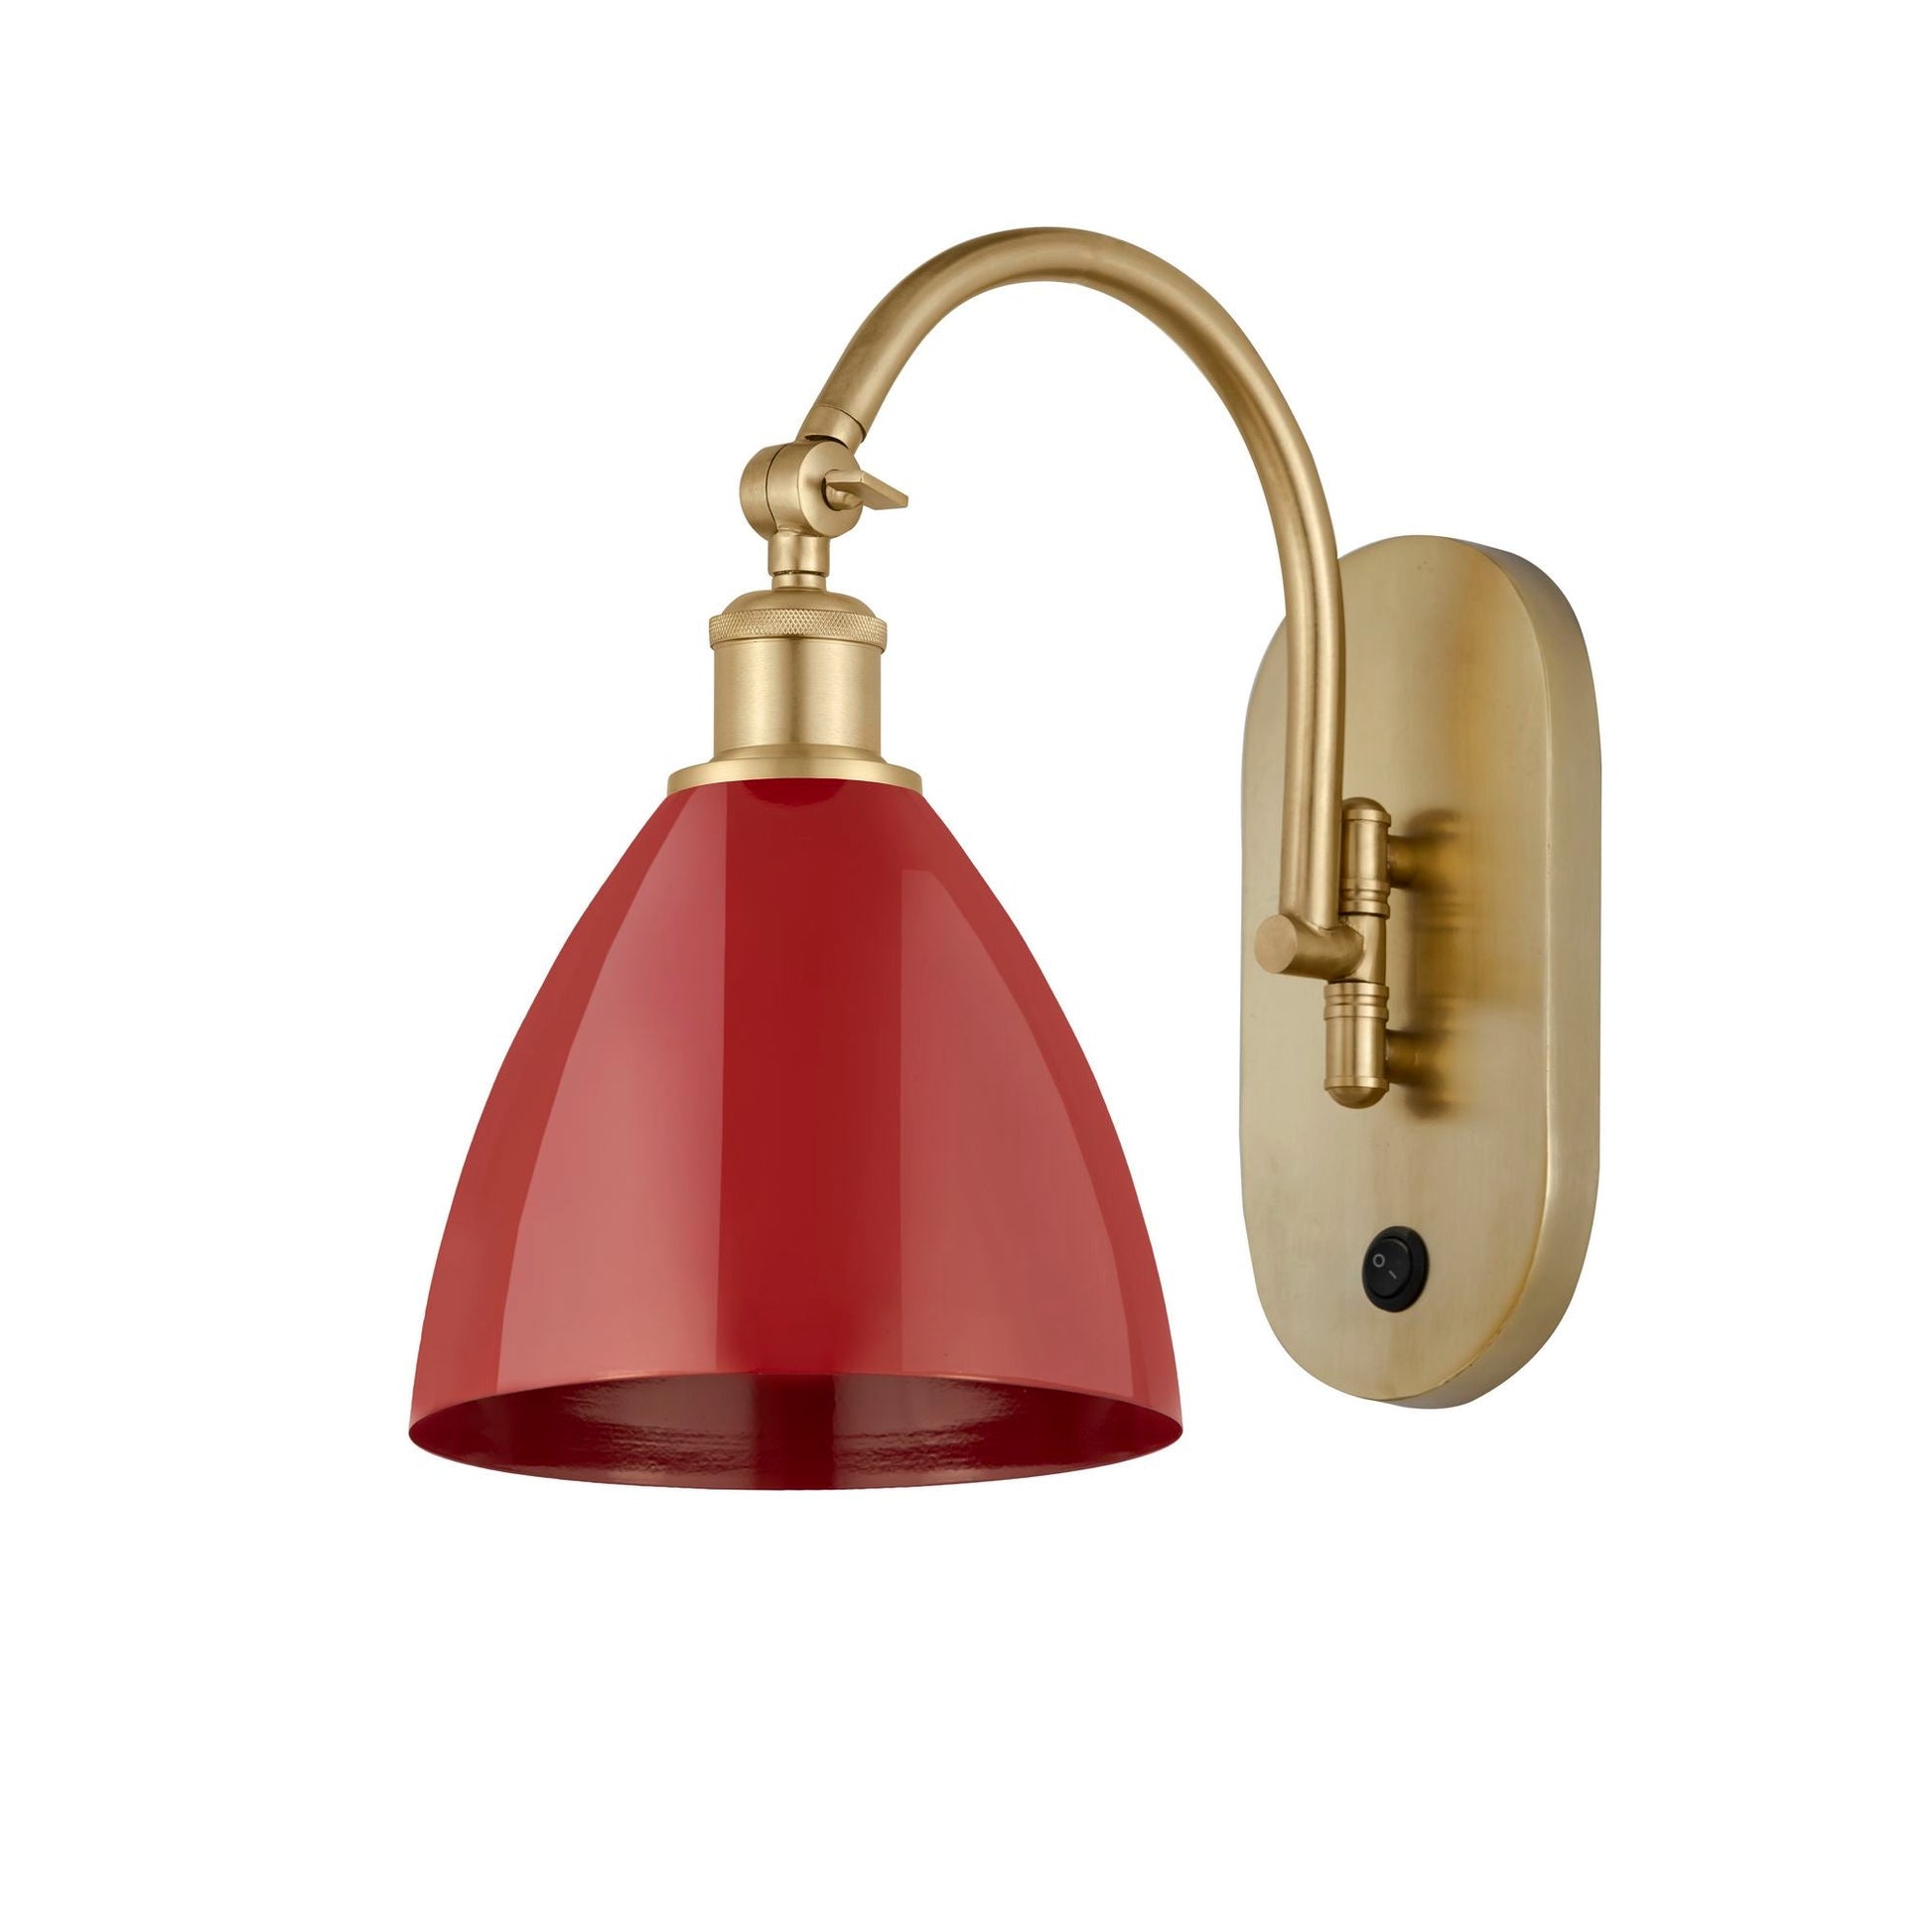 518-1W-SG-MBD-75-RD 1-Light 7.5" Satin Gold Sconce - Red Plymouth Dome Shade - LED Bulb - Dimmensions: 7.5 x 13.75 x 13.25 - Glass Up or Down: Yes